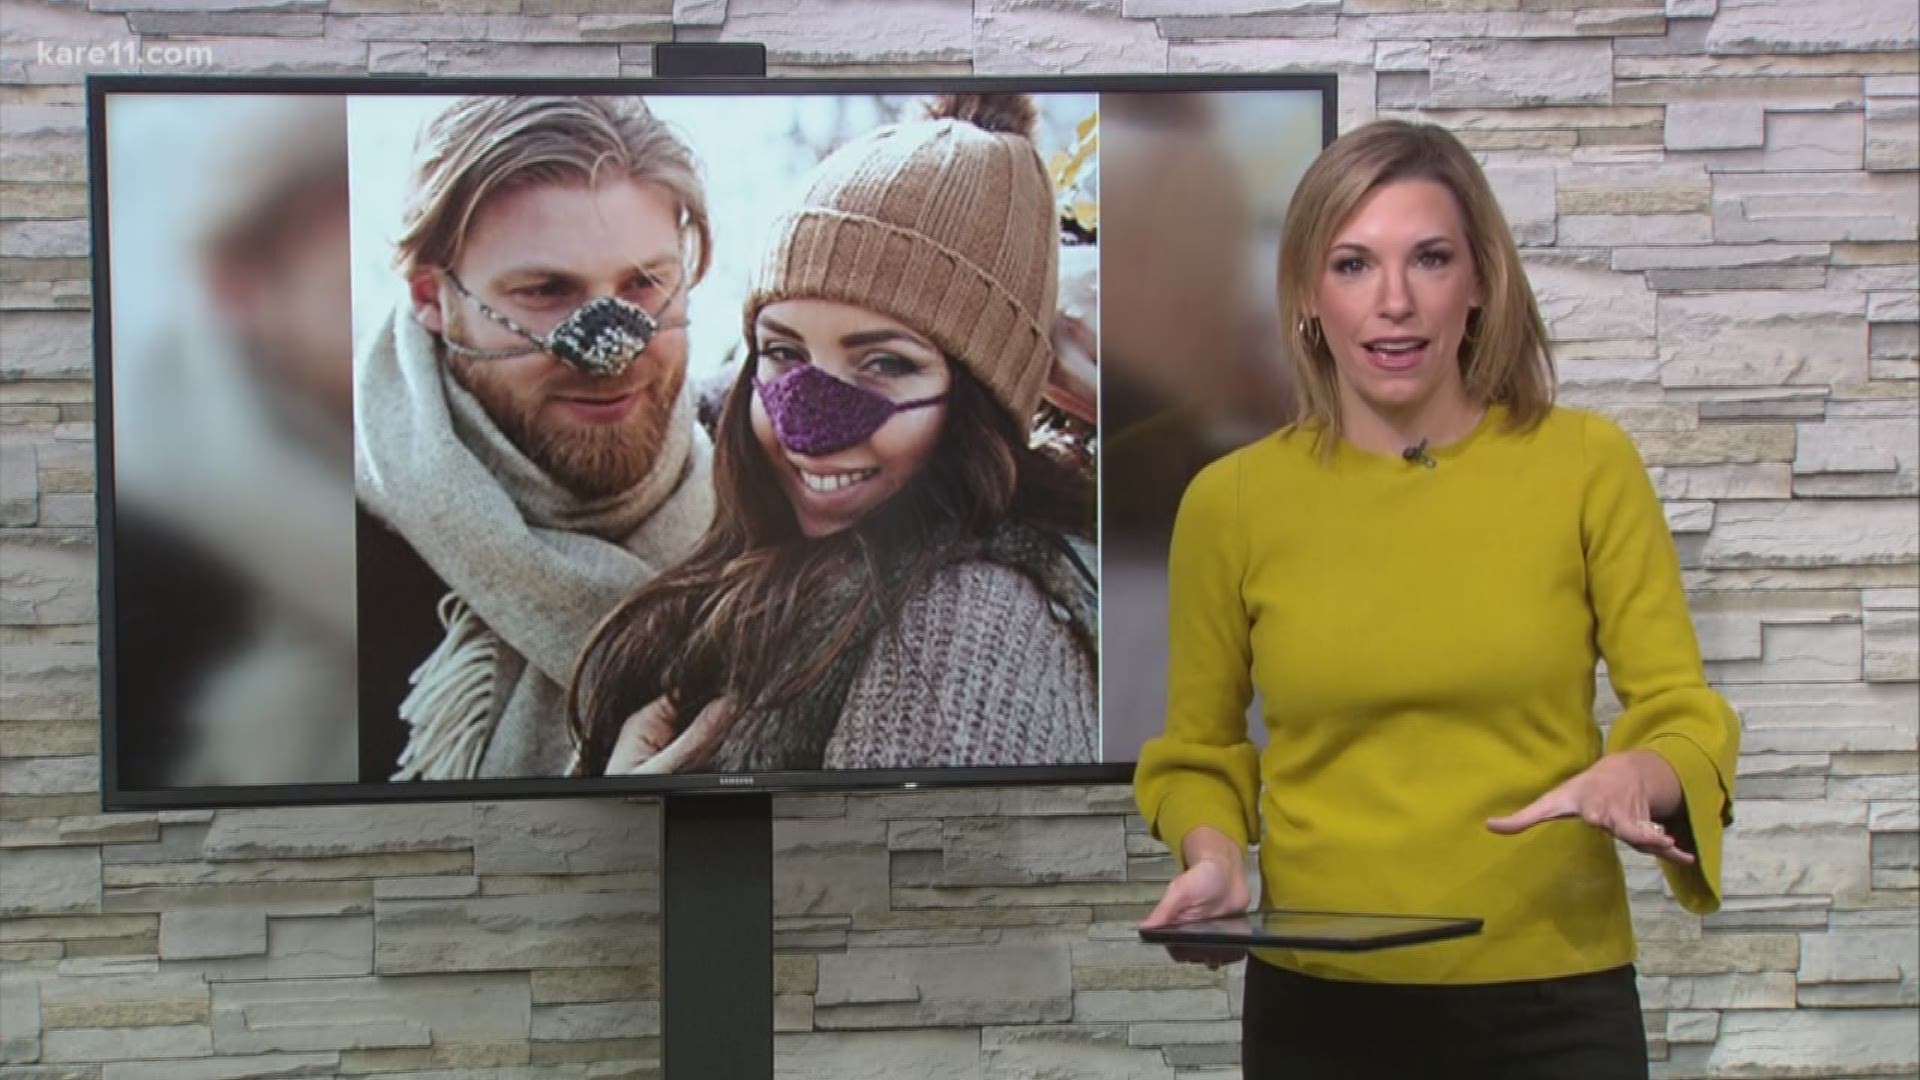 Nose warmers are the newest "trend" to stay warm this year, but not everyone is one board. KARE 11's Jeff Edmondson says, "I'd rather be frostbitten than wear that thing."